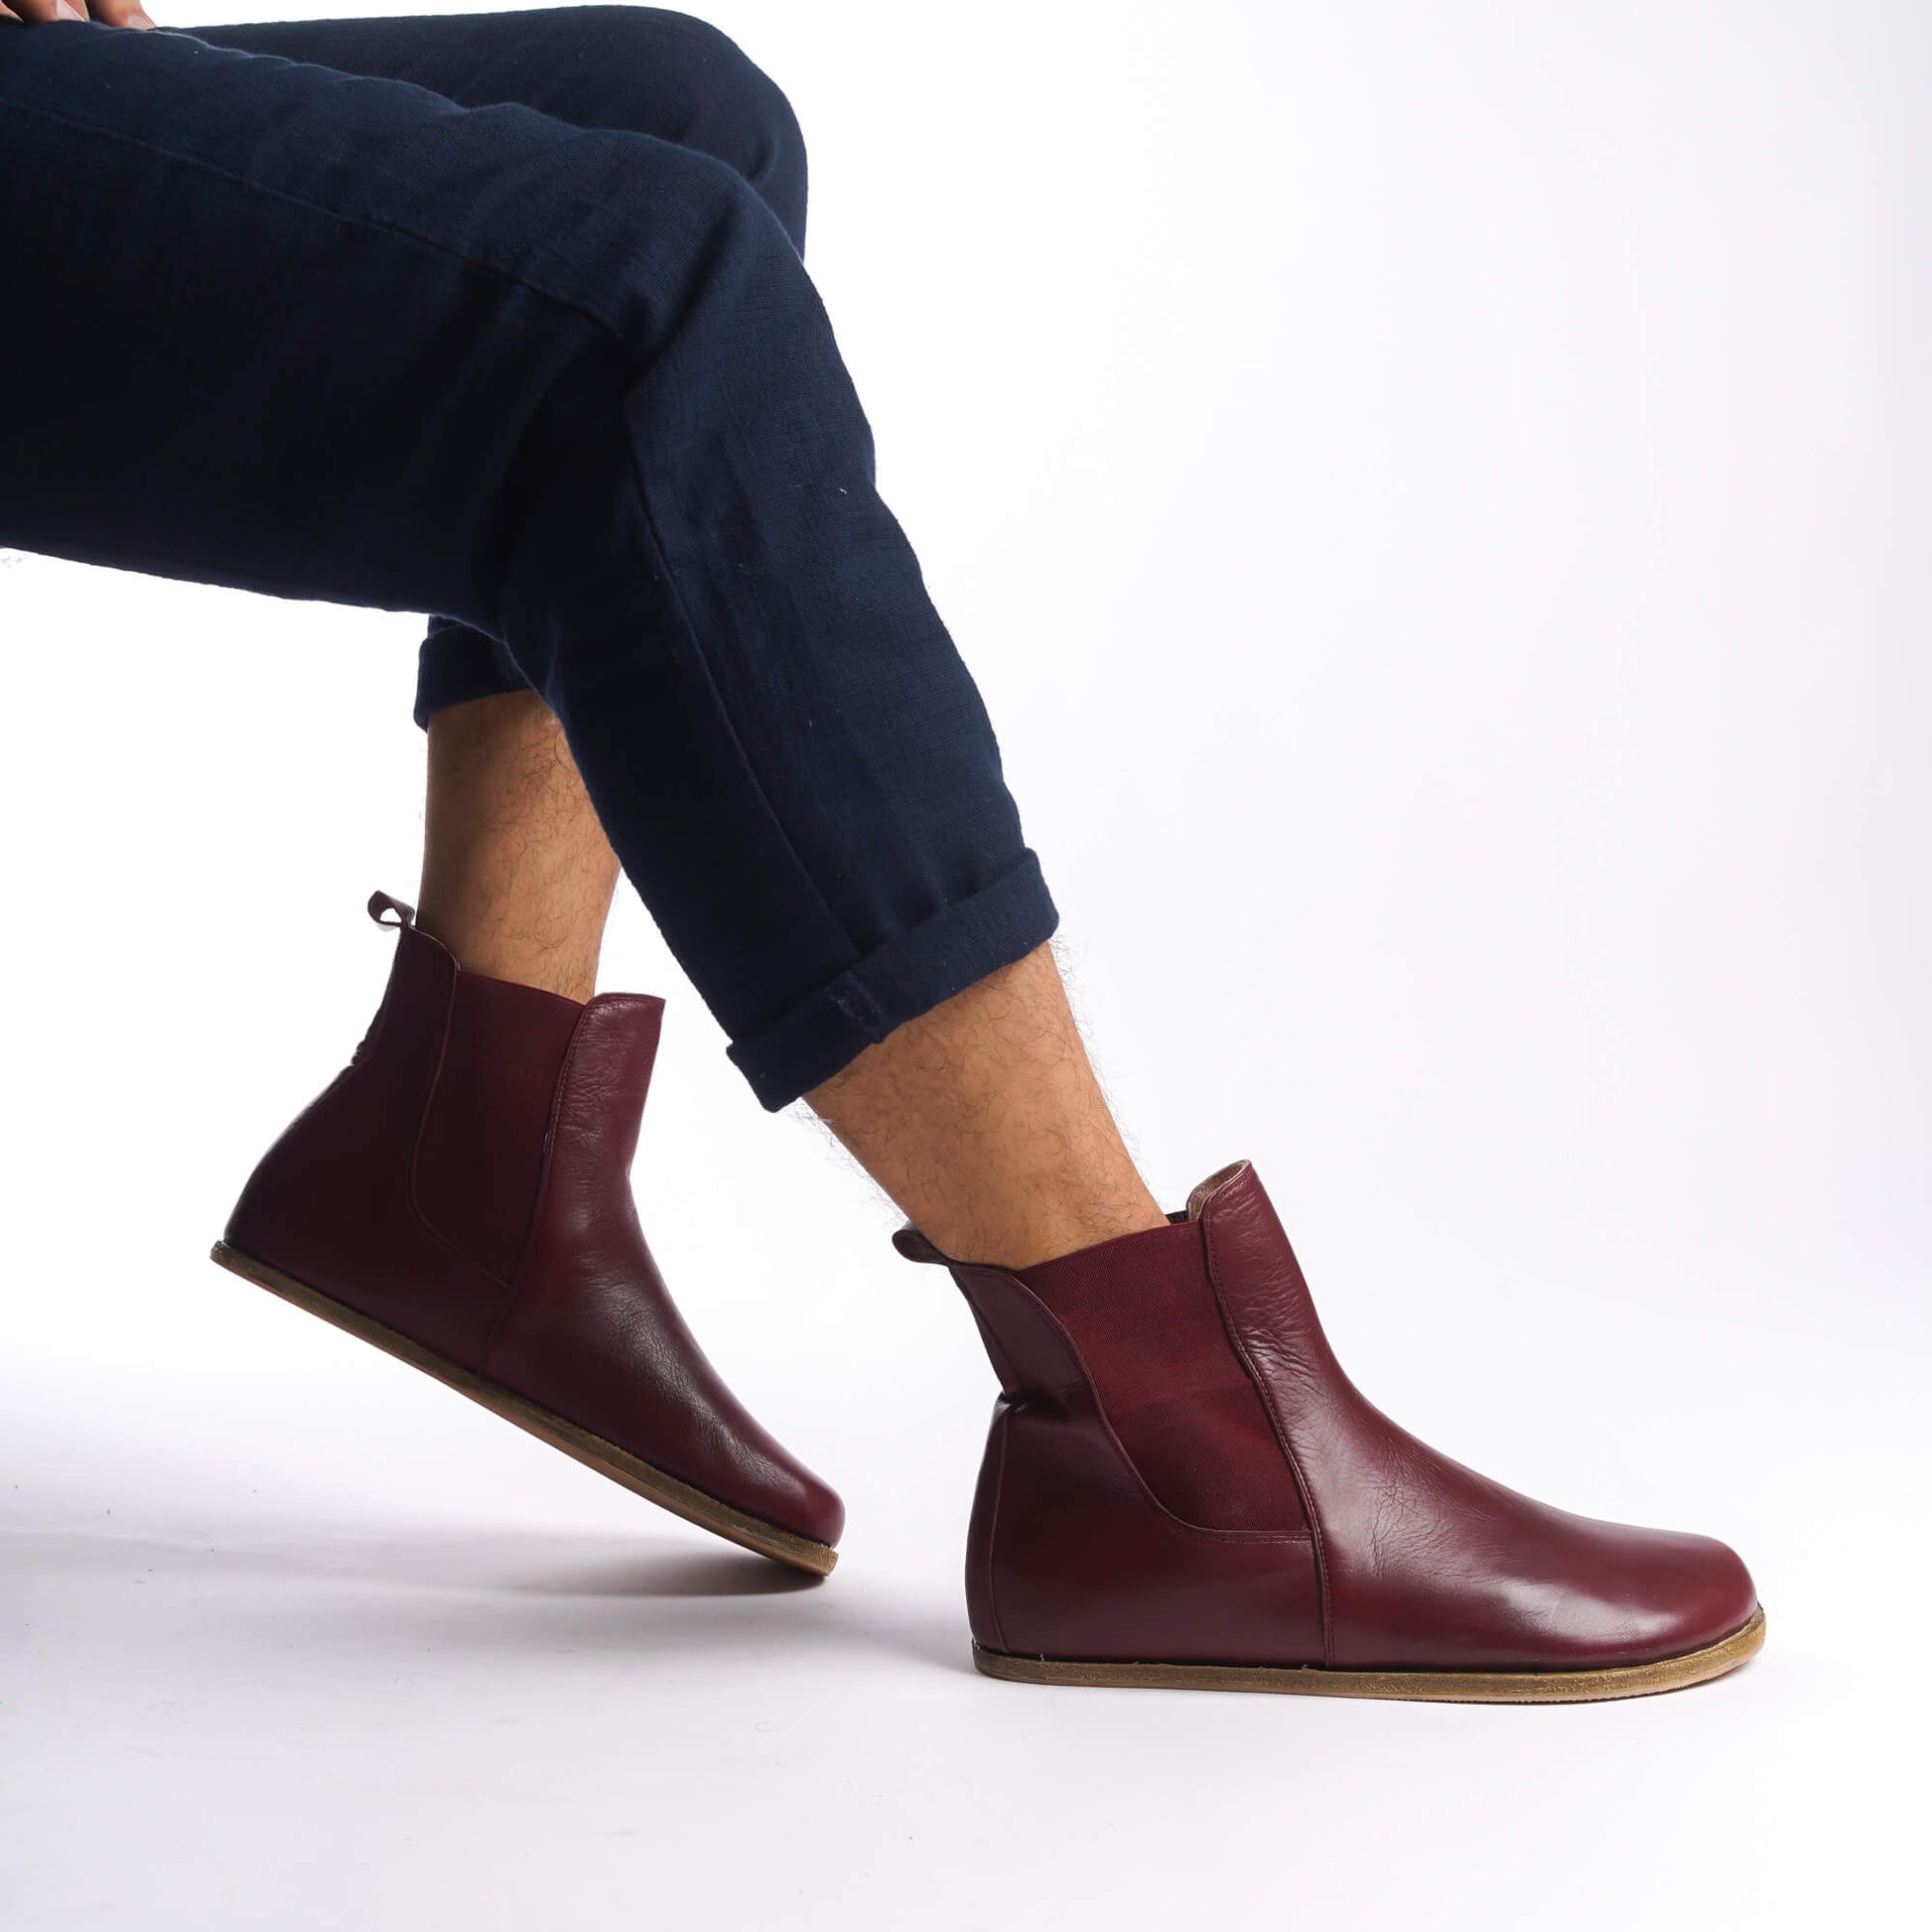 Men's burgundy genuine leather slip-on Chelsea boots, featuring an elastic side panel for easy wear.